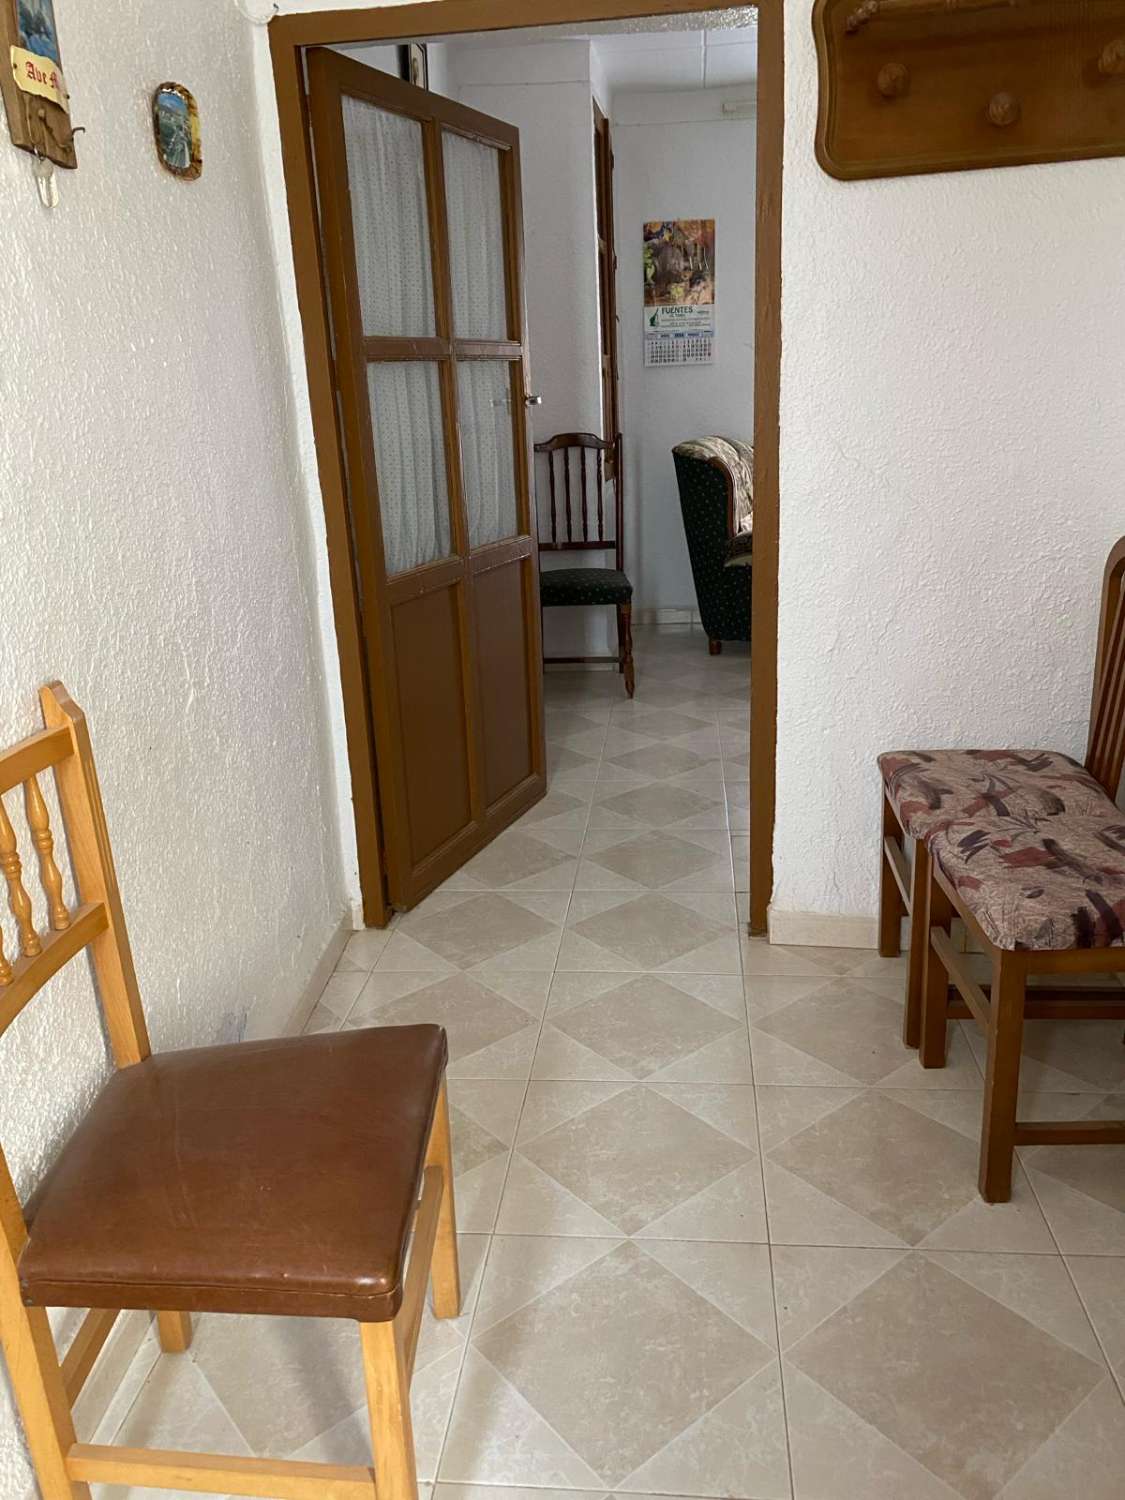 4/5 Bedroom, detached house with cave in Freila